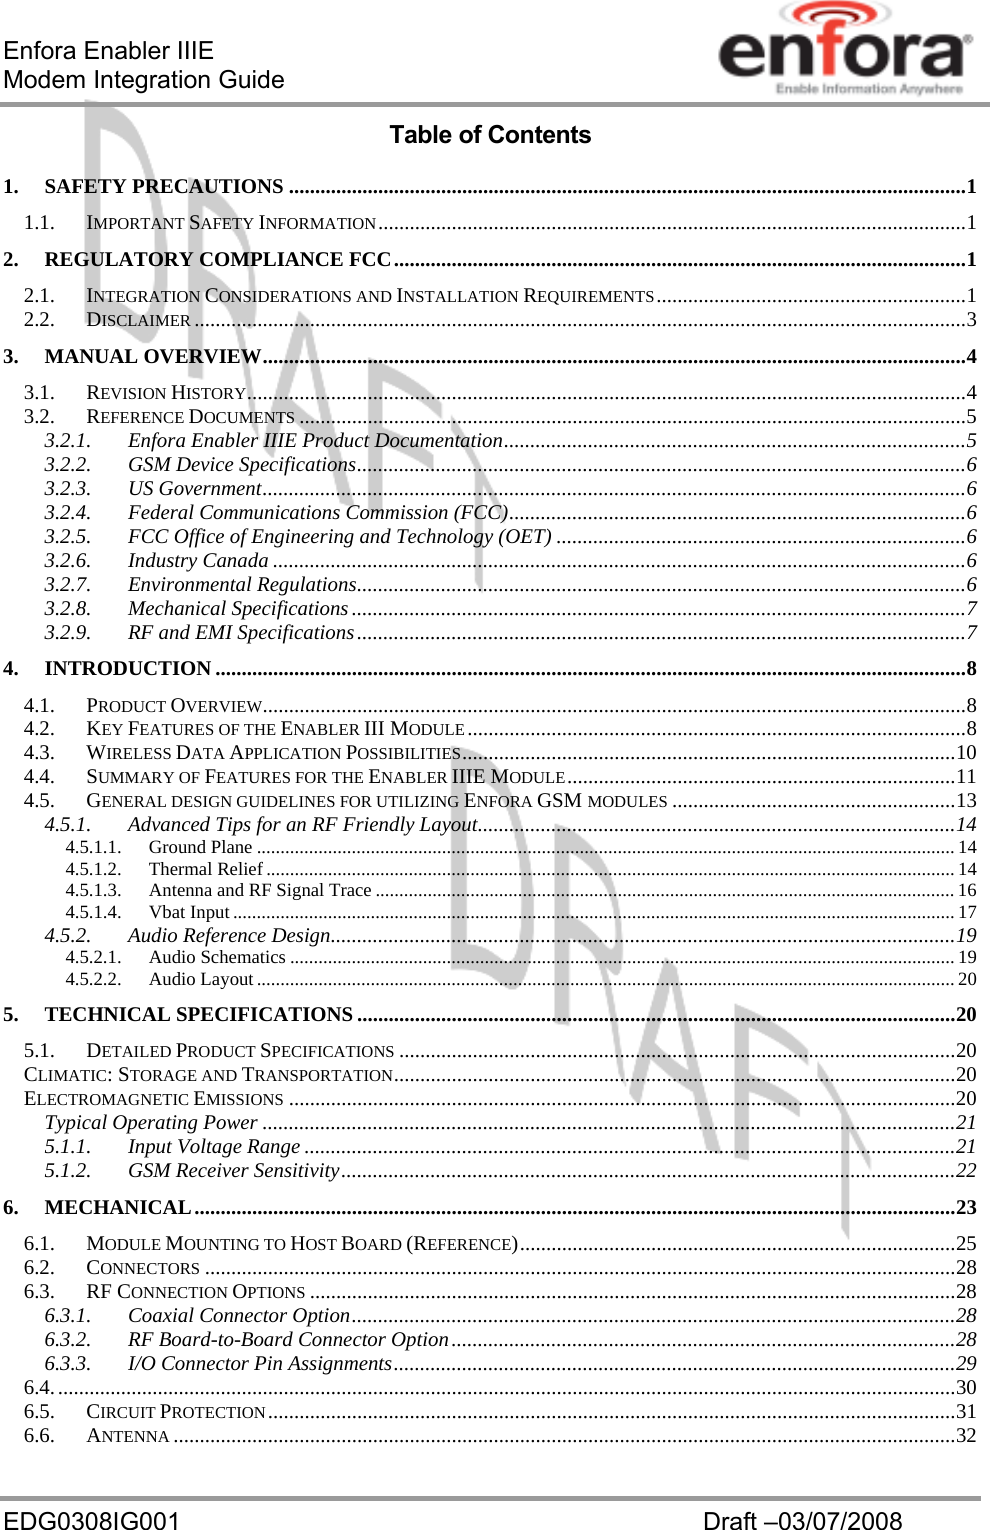 Enfora Enabler IIIE Modem Integration Guide EDG0308IG001  Draft –03/07/2008 Table of Contents 1. SAFETY PRECAUTIONS .................................................................................................................................1 1.1. IMPORTANT SAFETY INFORMATION................................................................................................................1 2. REGULATORY COMPLIANCE FCC.............................................................................................................1 2.1. INTEGRATION CONSIDERATIONS AND INSTALLATION REQUIREMENTS...........................................................1 2.2. DISCLAIMER ...................................................................................................................................................3 3. MANUAL OVERVIEW......................................................................................................................................4 3.1. REVISION HISTORY.........................................................................................................................................4 3.2. REFERENCE DOCUMENTS ...............................................................................................................................5 3.2.1. Enfora Enabler IIIE Product Documentation........................................................................................5 3.2.2. GSM Device Specifications....................................................................................................................6 3.2.3. US Government......................................................................................................................................6 3.2.4. Federal Communications Commission (FCC).......................................................................................6 3.2.5. FCC Office of Engineering and Technology (OET) ..............................................................................6 3.2.6. Industry Canada ....................................................................................................................................6 3.2.7. Environmental Regulations....................................................................................................................6 3.2.8. Mechanical Specifications.....................................................................................................................7 3.2.9. RF and EMI Specifications....................................................................................................................7 4. INTRODUCTION ...............................................................................................................................................8 4.1. PRODUCT OVERVIEW......................................................................................................................................8 4.2. KEY FEATURES OF THE ENABLER III MODULE...............................................................................................8 4.3. WIRELESS DATA APPLICATION POSSIBILITIES..............................................................................................10 4.4. SUMMARY OF FEATURES FOR THE ENABLER IIIE MODULE..........................................................................11 4.5. GENERAL DESIGN GUIDELINES FOR UTILIZING ENFORA GSM MODULES ......................................................13 4.5.1. Advanced Tips for an RF Friendly Layout...........................................................................................14 4.5.1.1. Ground Plane ................................................................................................................................................... 14 4.5.1.2. Thermal Relief ................................................................................................................................................. 14 4.5.1.3. Antenna and RF Signal Trace .......................................................................................................................... 16 4.5.1.4. Vbat Input ........................................................................................................................................................ 17 4.5.2. Audio Reference Design.......................................................................................................................19 4.5.2.1. Audio Schematics ............................................................................................................................................ 19 4.5.2.2. Audio Layout................................................................................................................................................... 20 5. TECHNICAL SPECIFICATIONS..................................................................................................................20 5.1. DETAILED PRODUCT SPECIFICATIONS ..........................................................................................................20 CLIMATIC: STORAGE AND TRANSPORTATION...........................................................................................................20 ELECTROMAGNETIC EMISSIONS ...............................................................................................................................20 Typical Operating Power ....................................................................................................................................21 5.1.1. Input Voltage Range ............................................................................................................................21 5.1.2. GSM Receiver Sensitivity.....................................................................................................................22 6. MECHANICAL.................................................................................................................................................23 6.1. MODULE MOUNTING TO HOST BOARD (REFERENCE)...................................................................................25 6.2. CONNECTORS ...............................................................................................................................................28 6.3. RF CONNECTION OPTIONS ...........................................................................................................................28 6.3.1. Coaxial Connector Option...................................................................................................................28 6.3.2. RF Board-to-Board Connector Option................................................................................................28 6.3.3. I/O Connector Pin Assignments...........................................................................................................29 6.4............................................................................................................................................................................30 6.5. CIRCUIT PROTECTION...................................................................................................................................31 6.6. ANTENNA .....................................................................................................................................................32 